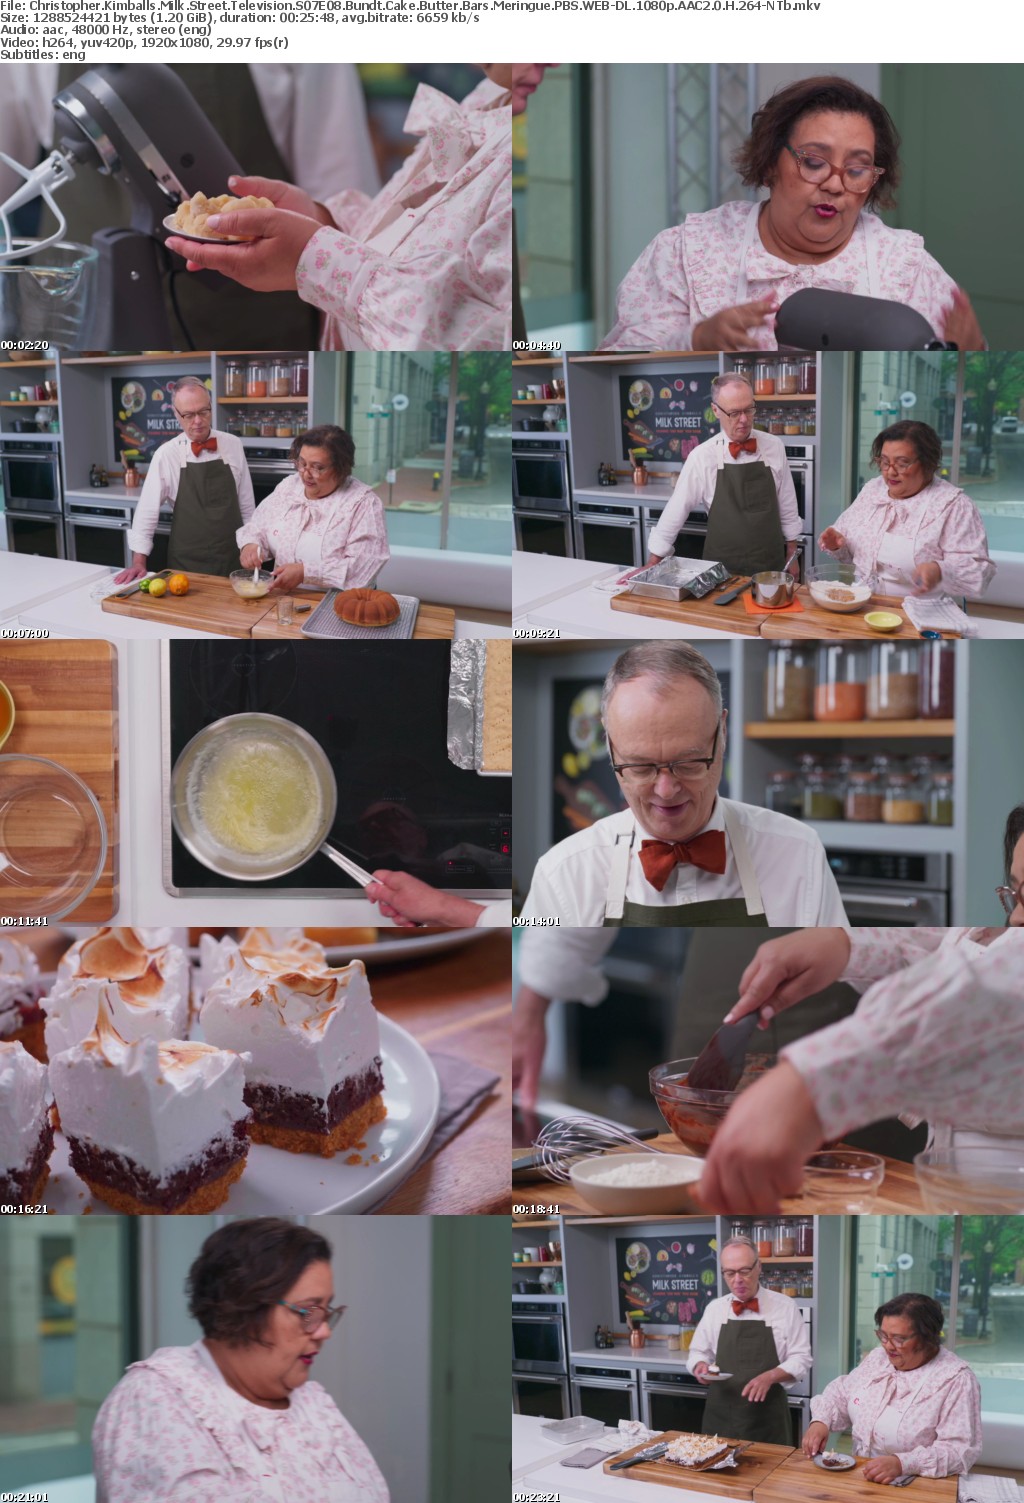 Christopher Kimballs Milk Street Television S07E08 Bundt Cake Butter Bars Meringue PBS WEB-DL 1080p AAC2 0 H 264-NTb